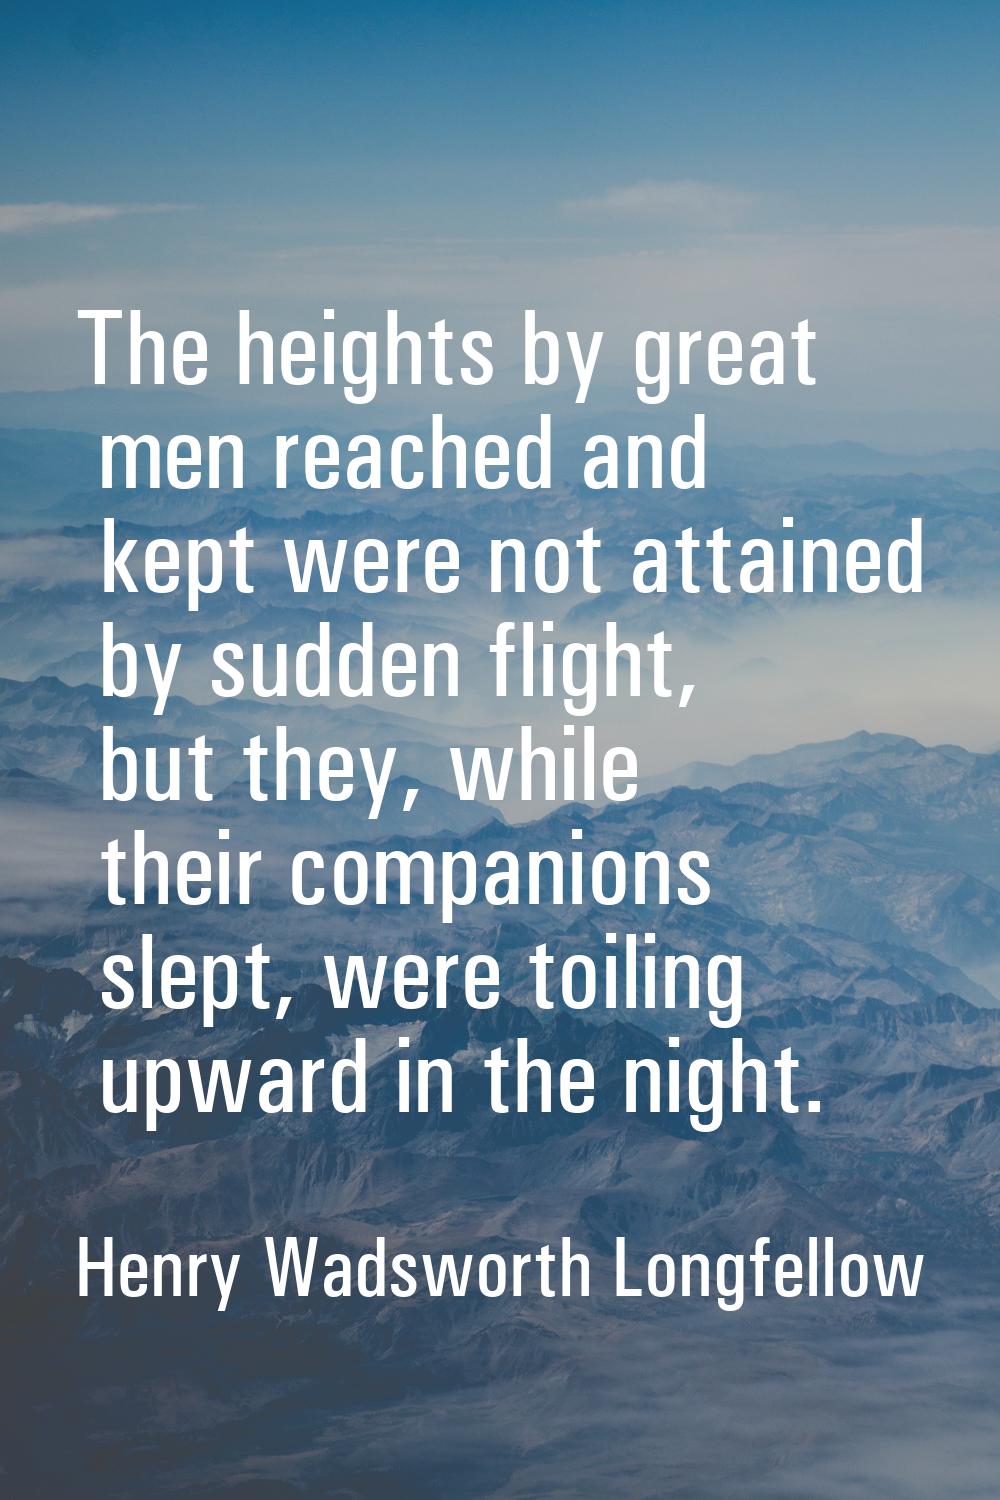 The heights by great men reached and kept were not attained by sudden flight, but they, while their